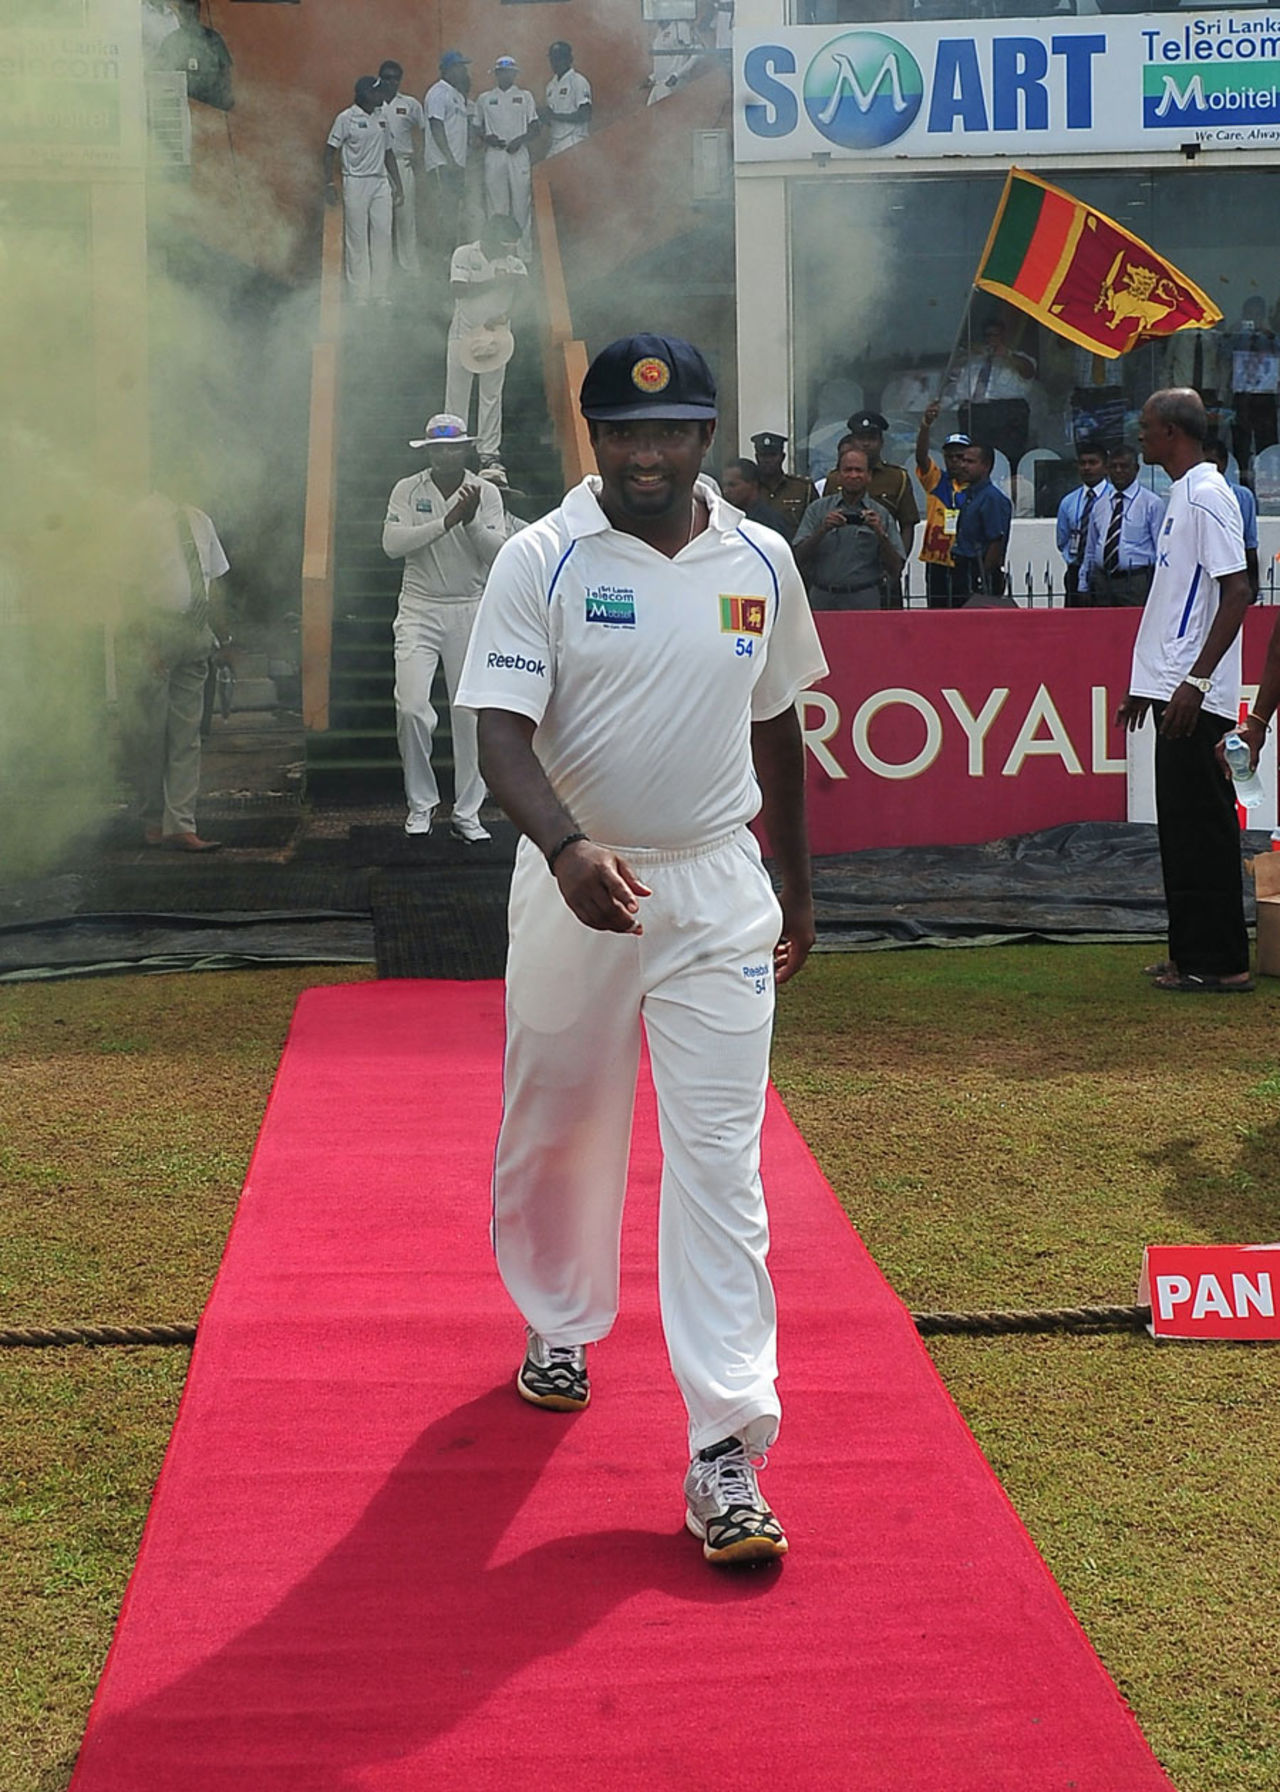 Muttiah Muralitharan walks down a red carpet into the field for his last day of Test cricket, Sri Lanka v India, 1st Test, Galle, 5th day, July 22, 2010